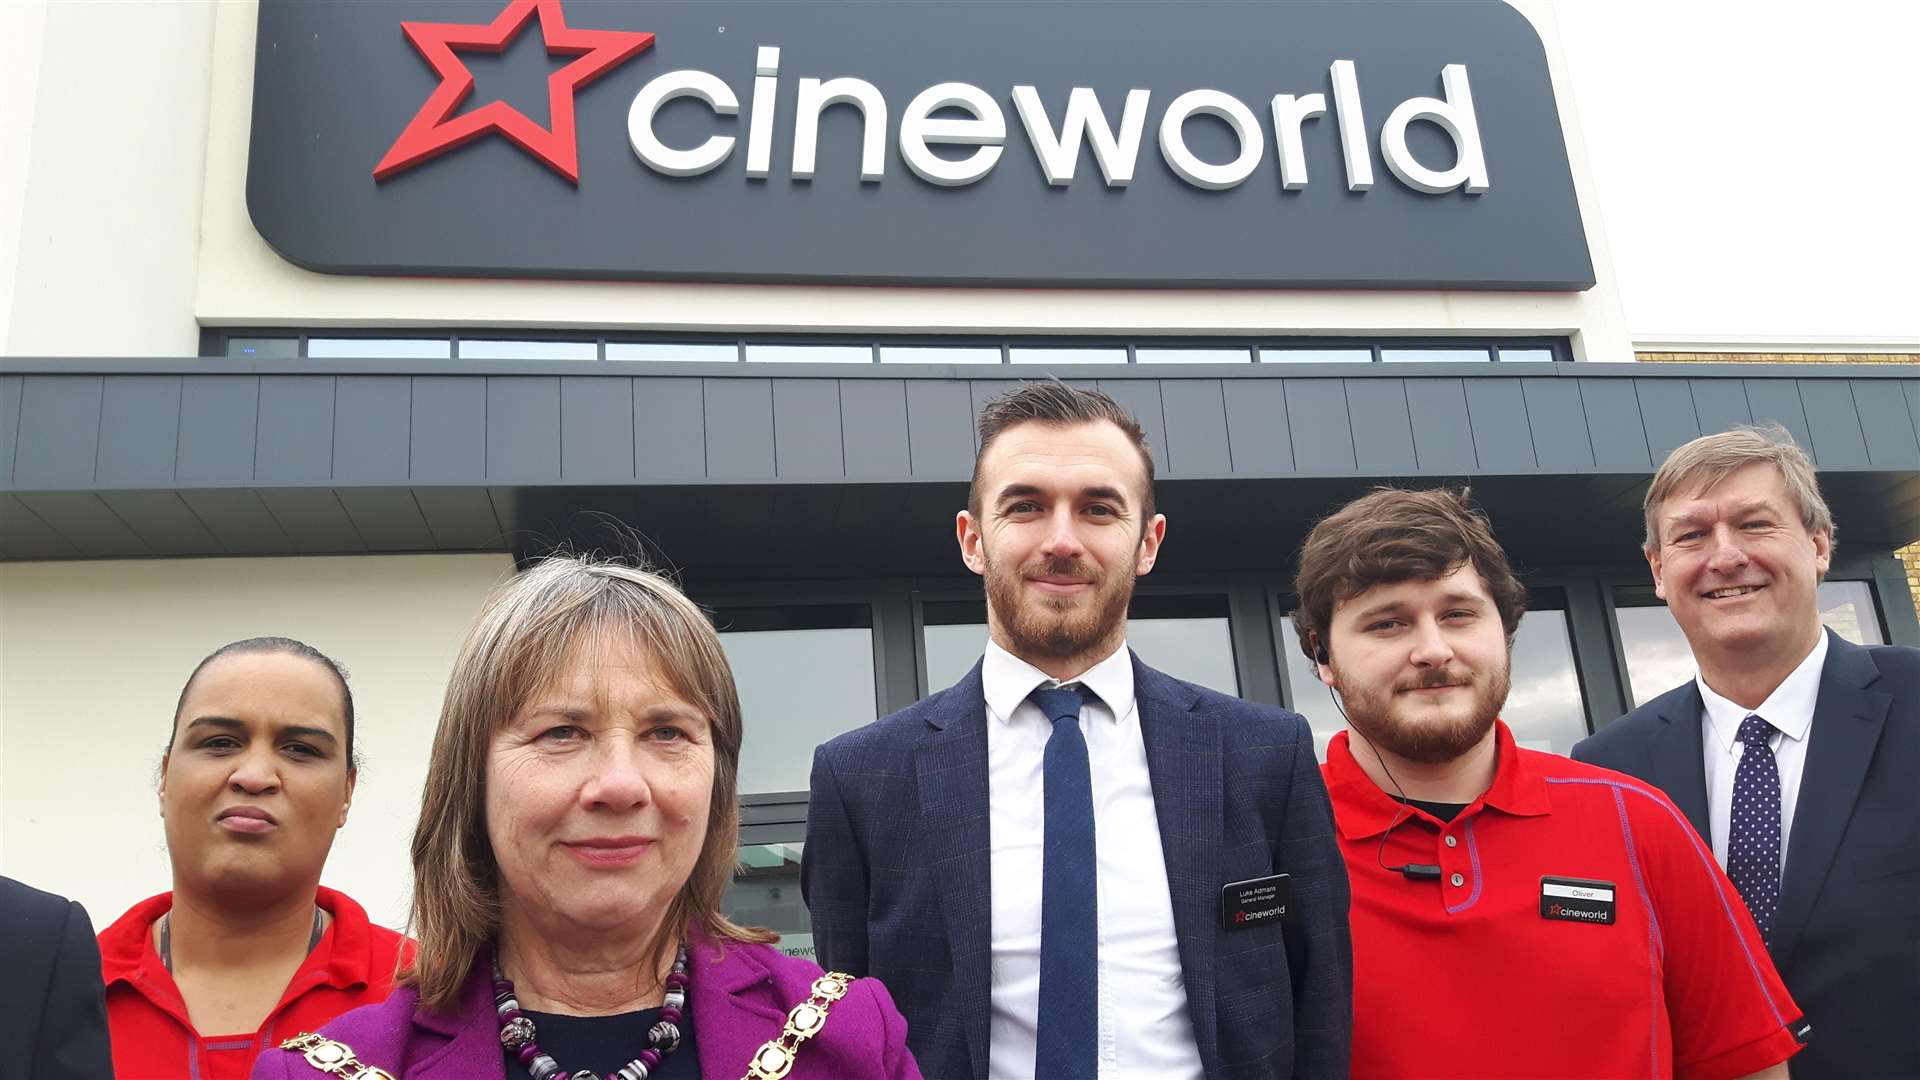 Dover District Council leader and chairman Keith Morris and Sue Chandler with staff on the day Cineworld opened at St James'